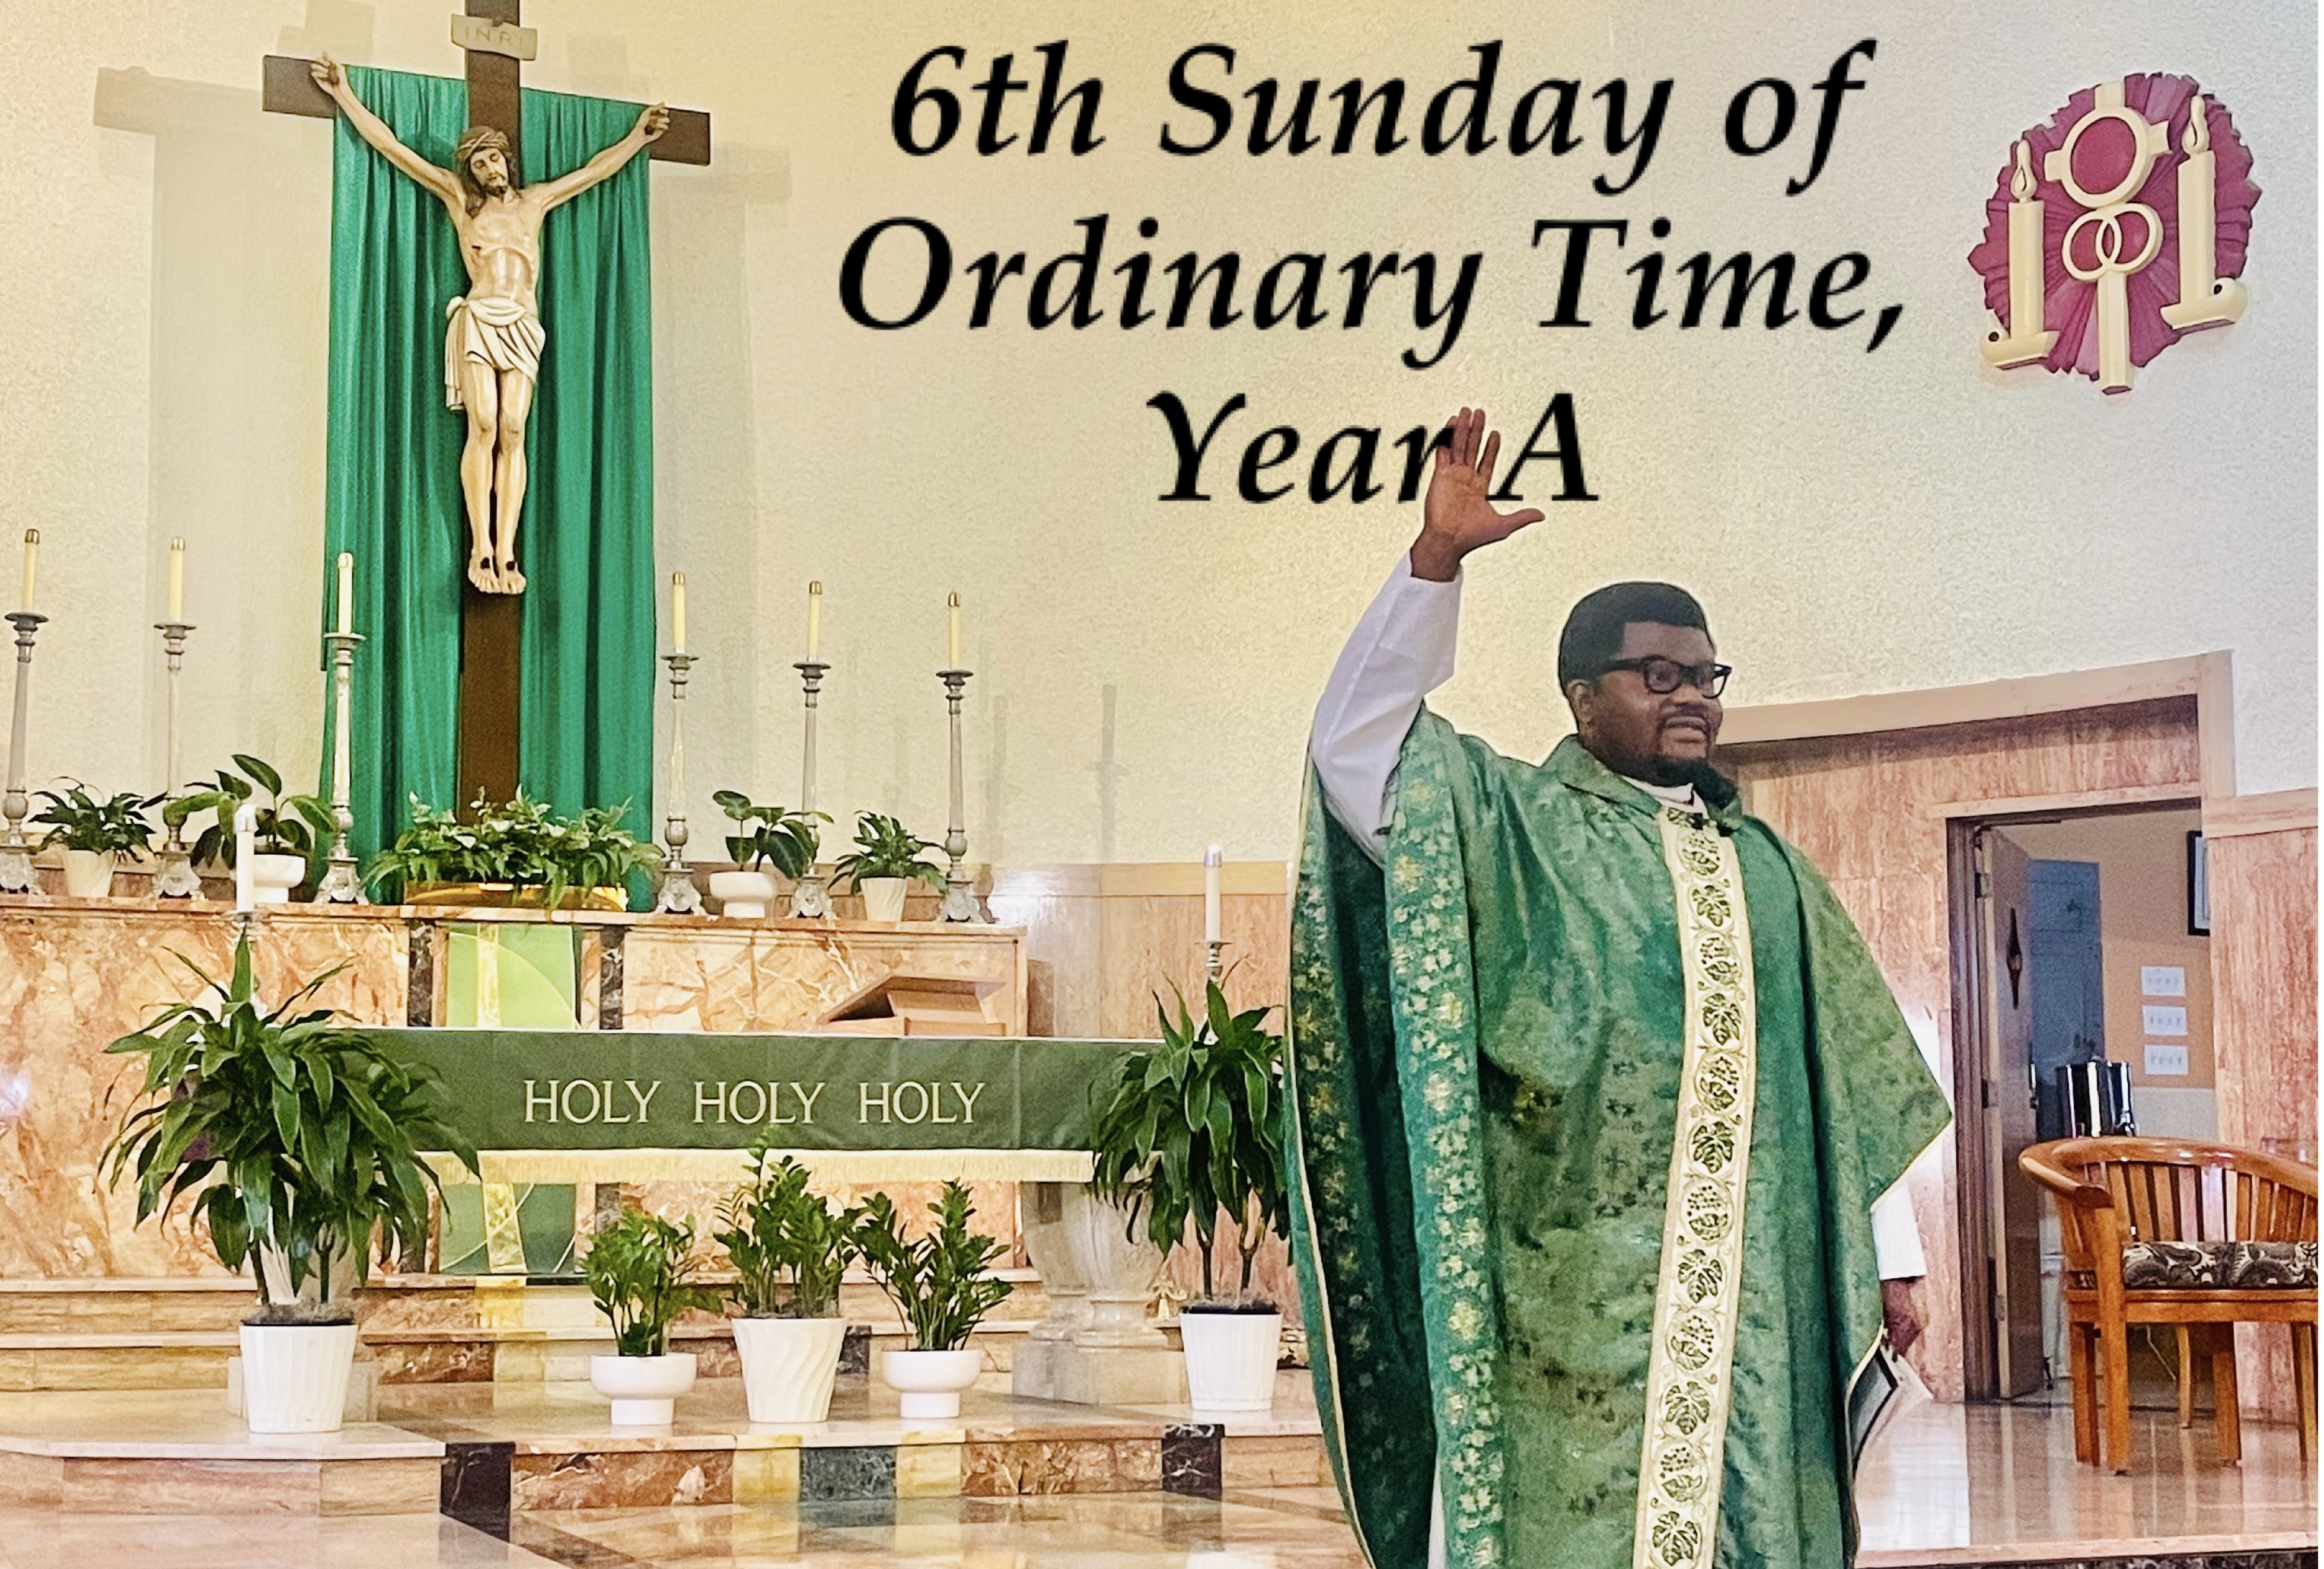 6th Sunday of Ordinary Time, Year A